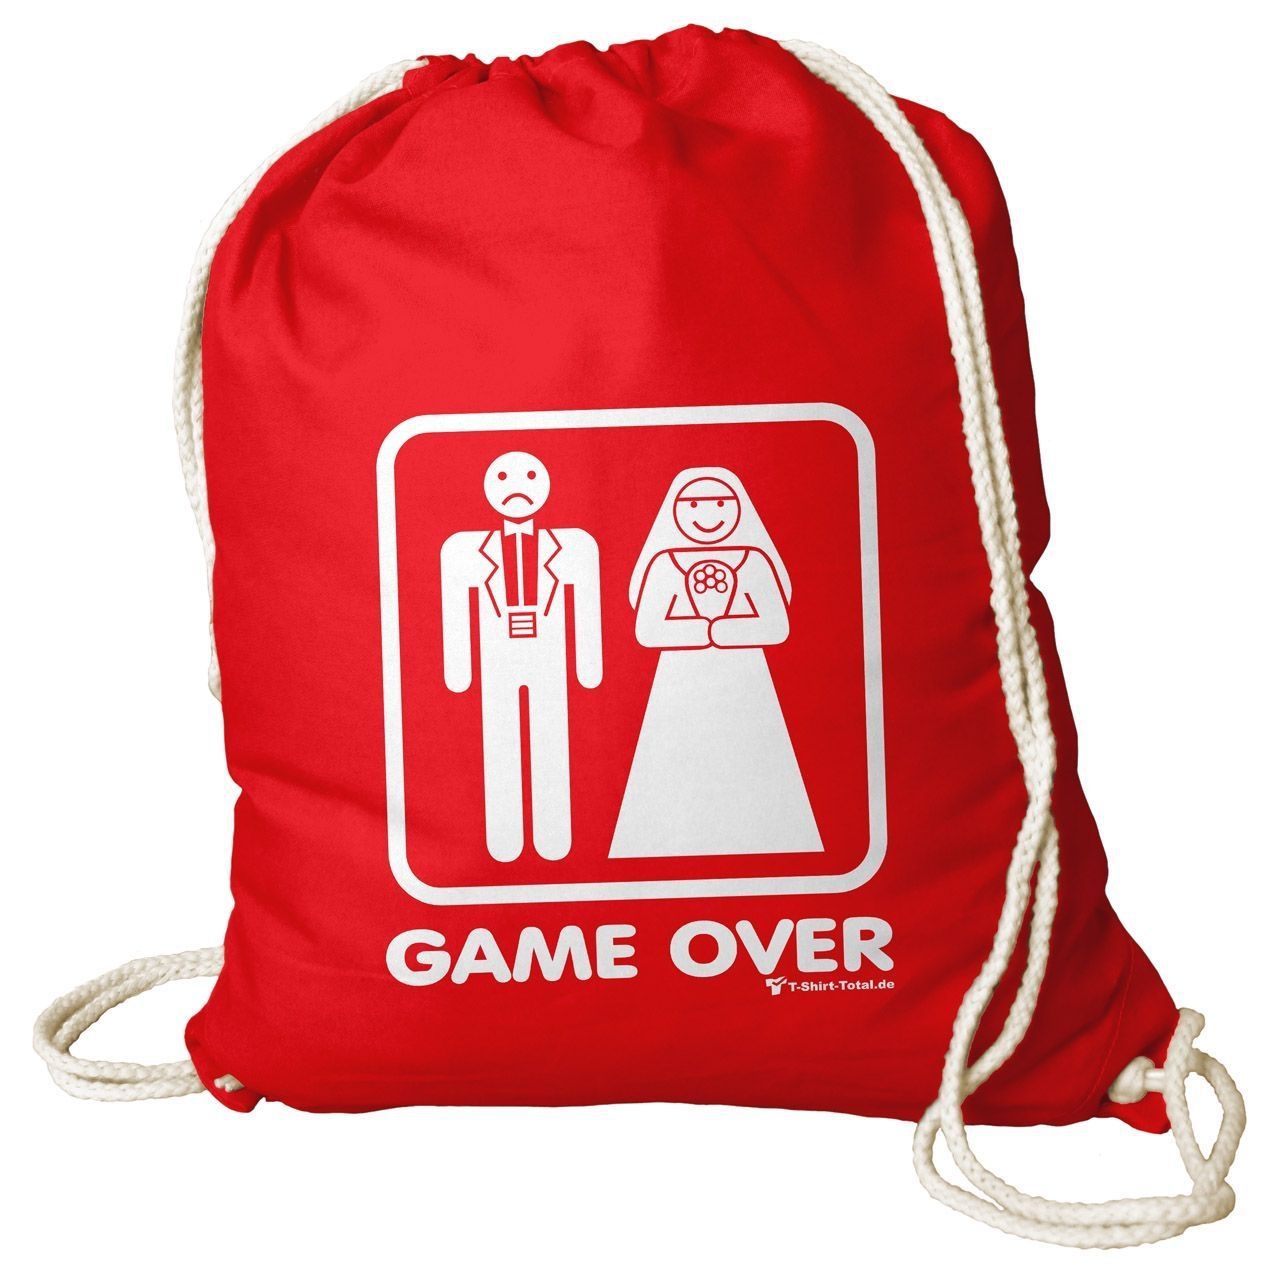 Game Over Rucksack Beutel rot